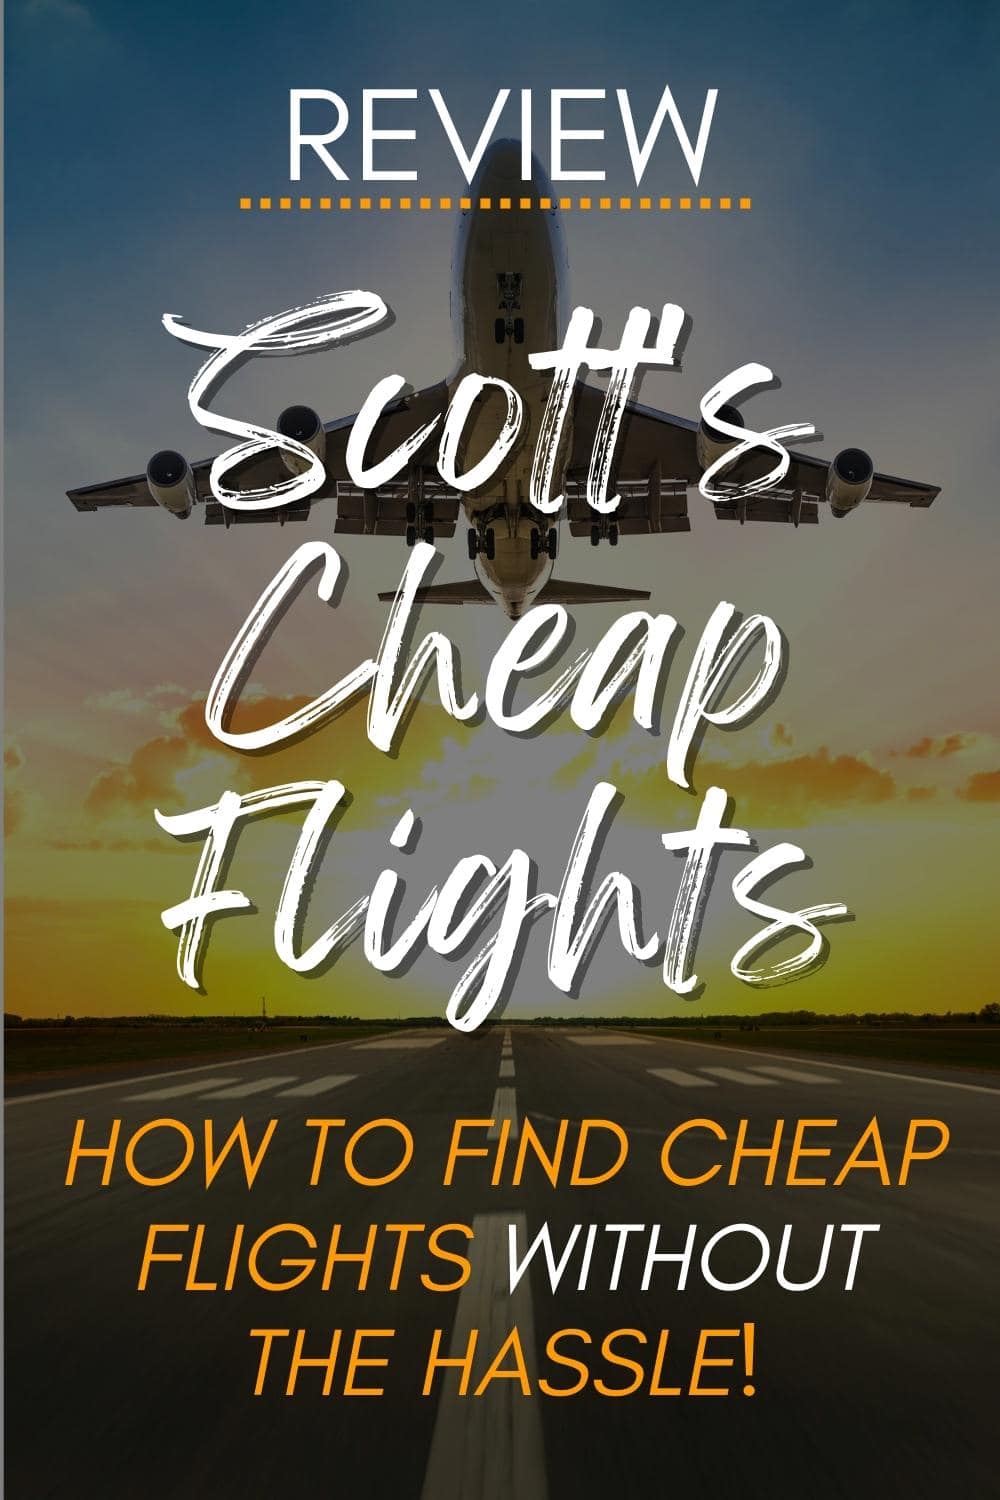 Scott’s Cheap Flights Review: How to Get Amazing Deals on Airfare the Easy Way